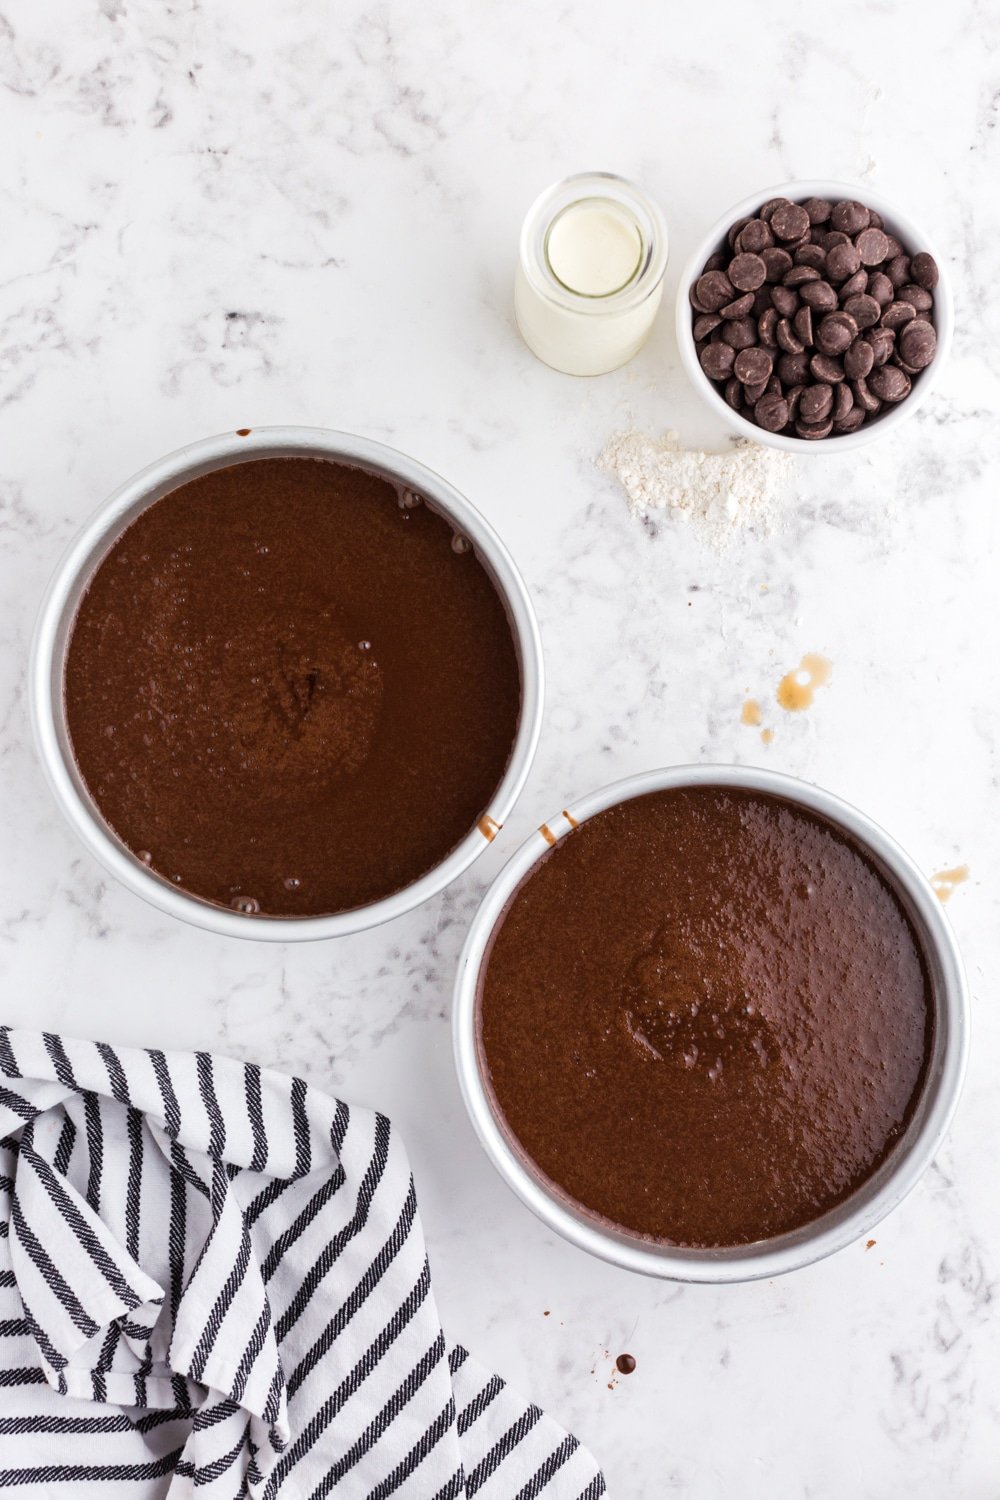 Two round cake pans with baked chocolate cake in them.